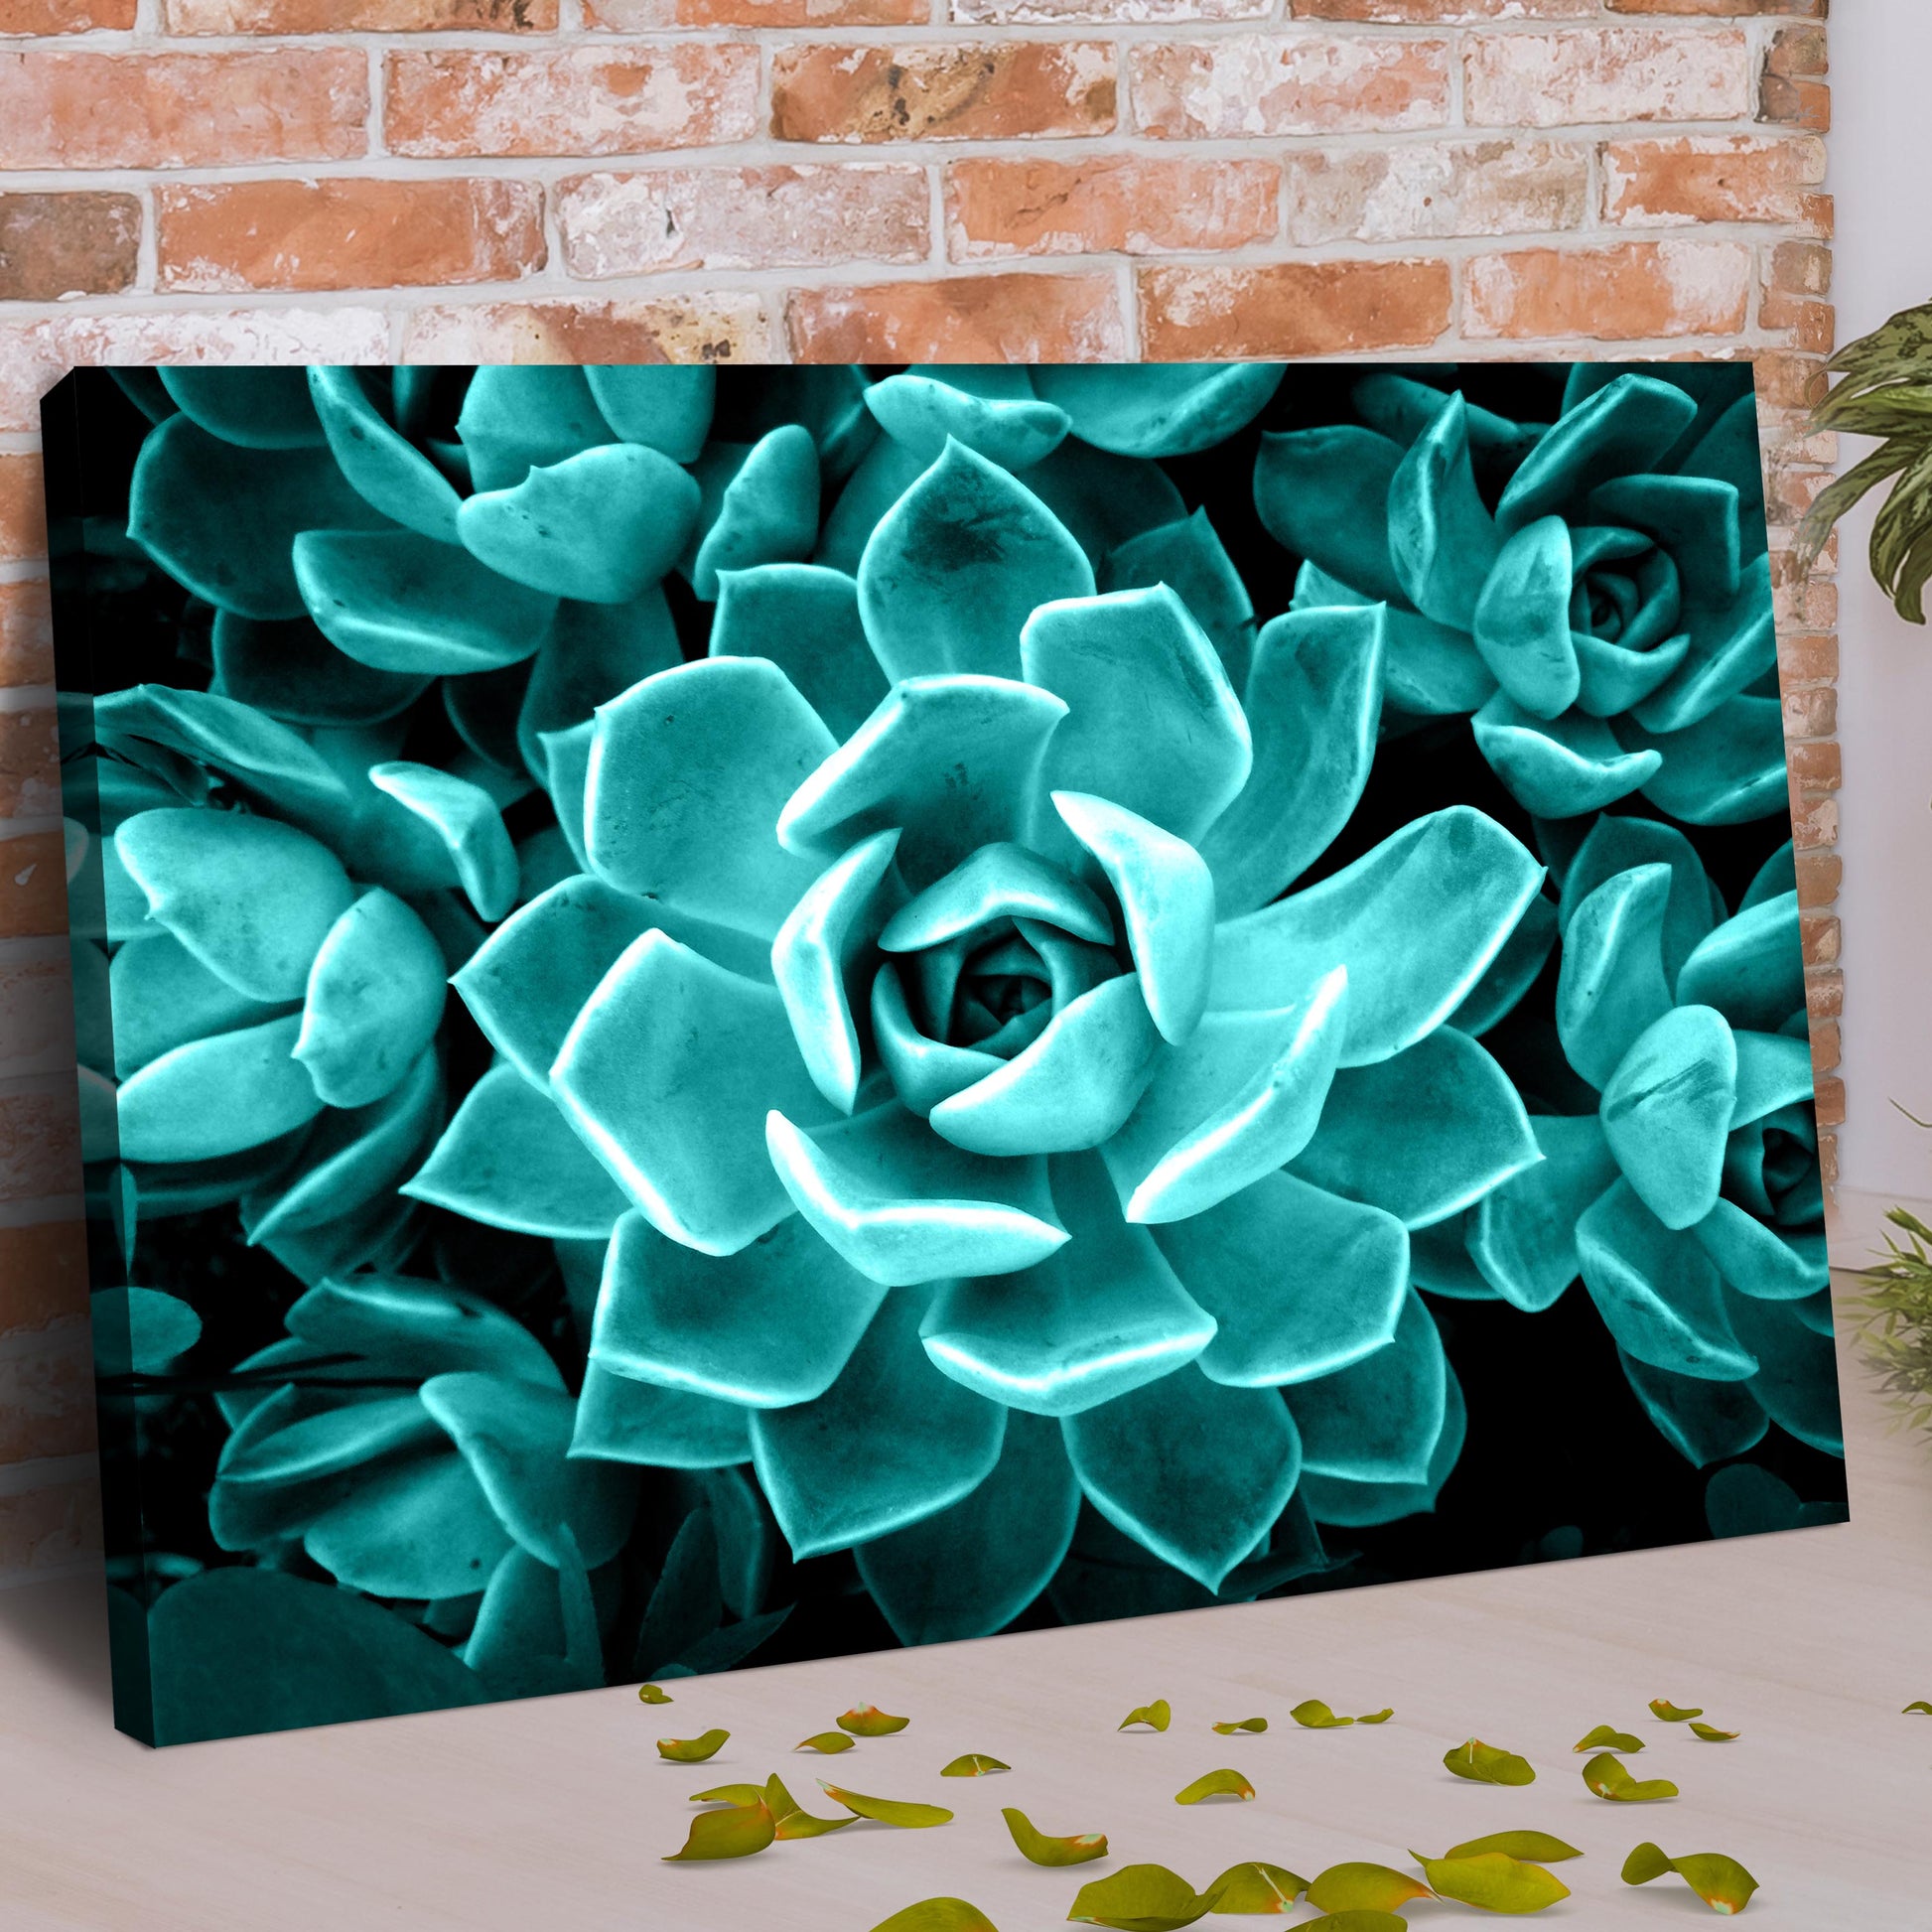 Teal Rose Succulent Canvas Wall Art II Style 1 - Image by Tailored Canvases